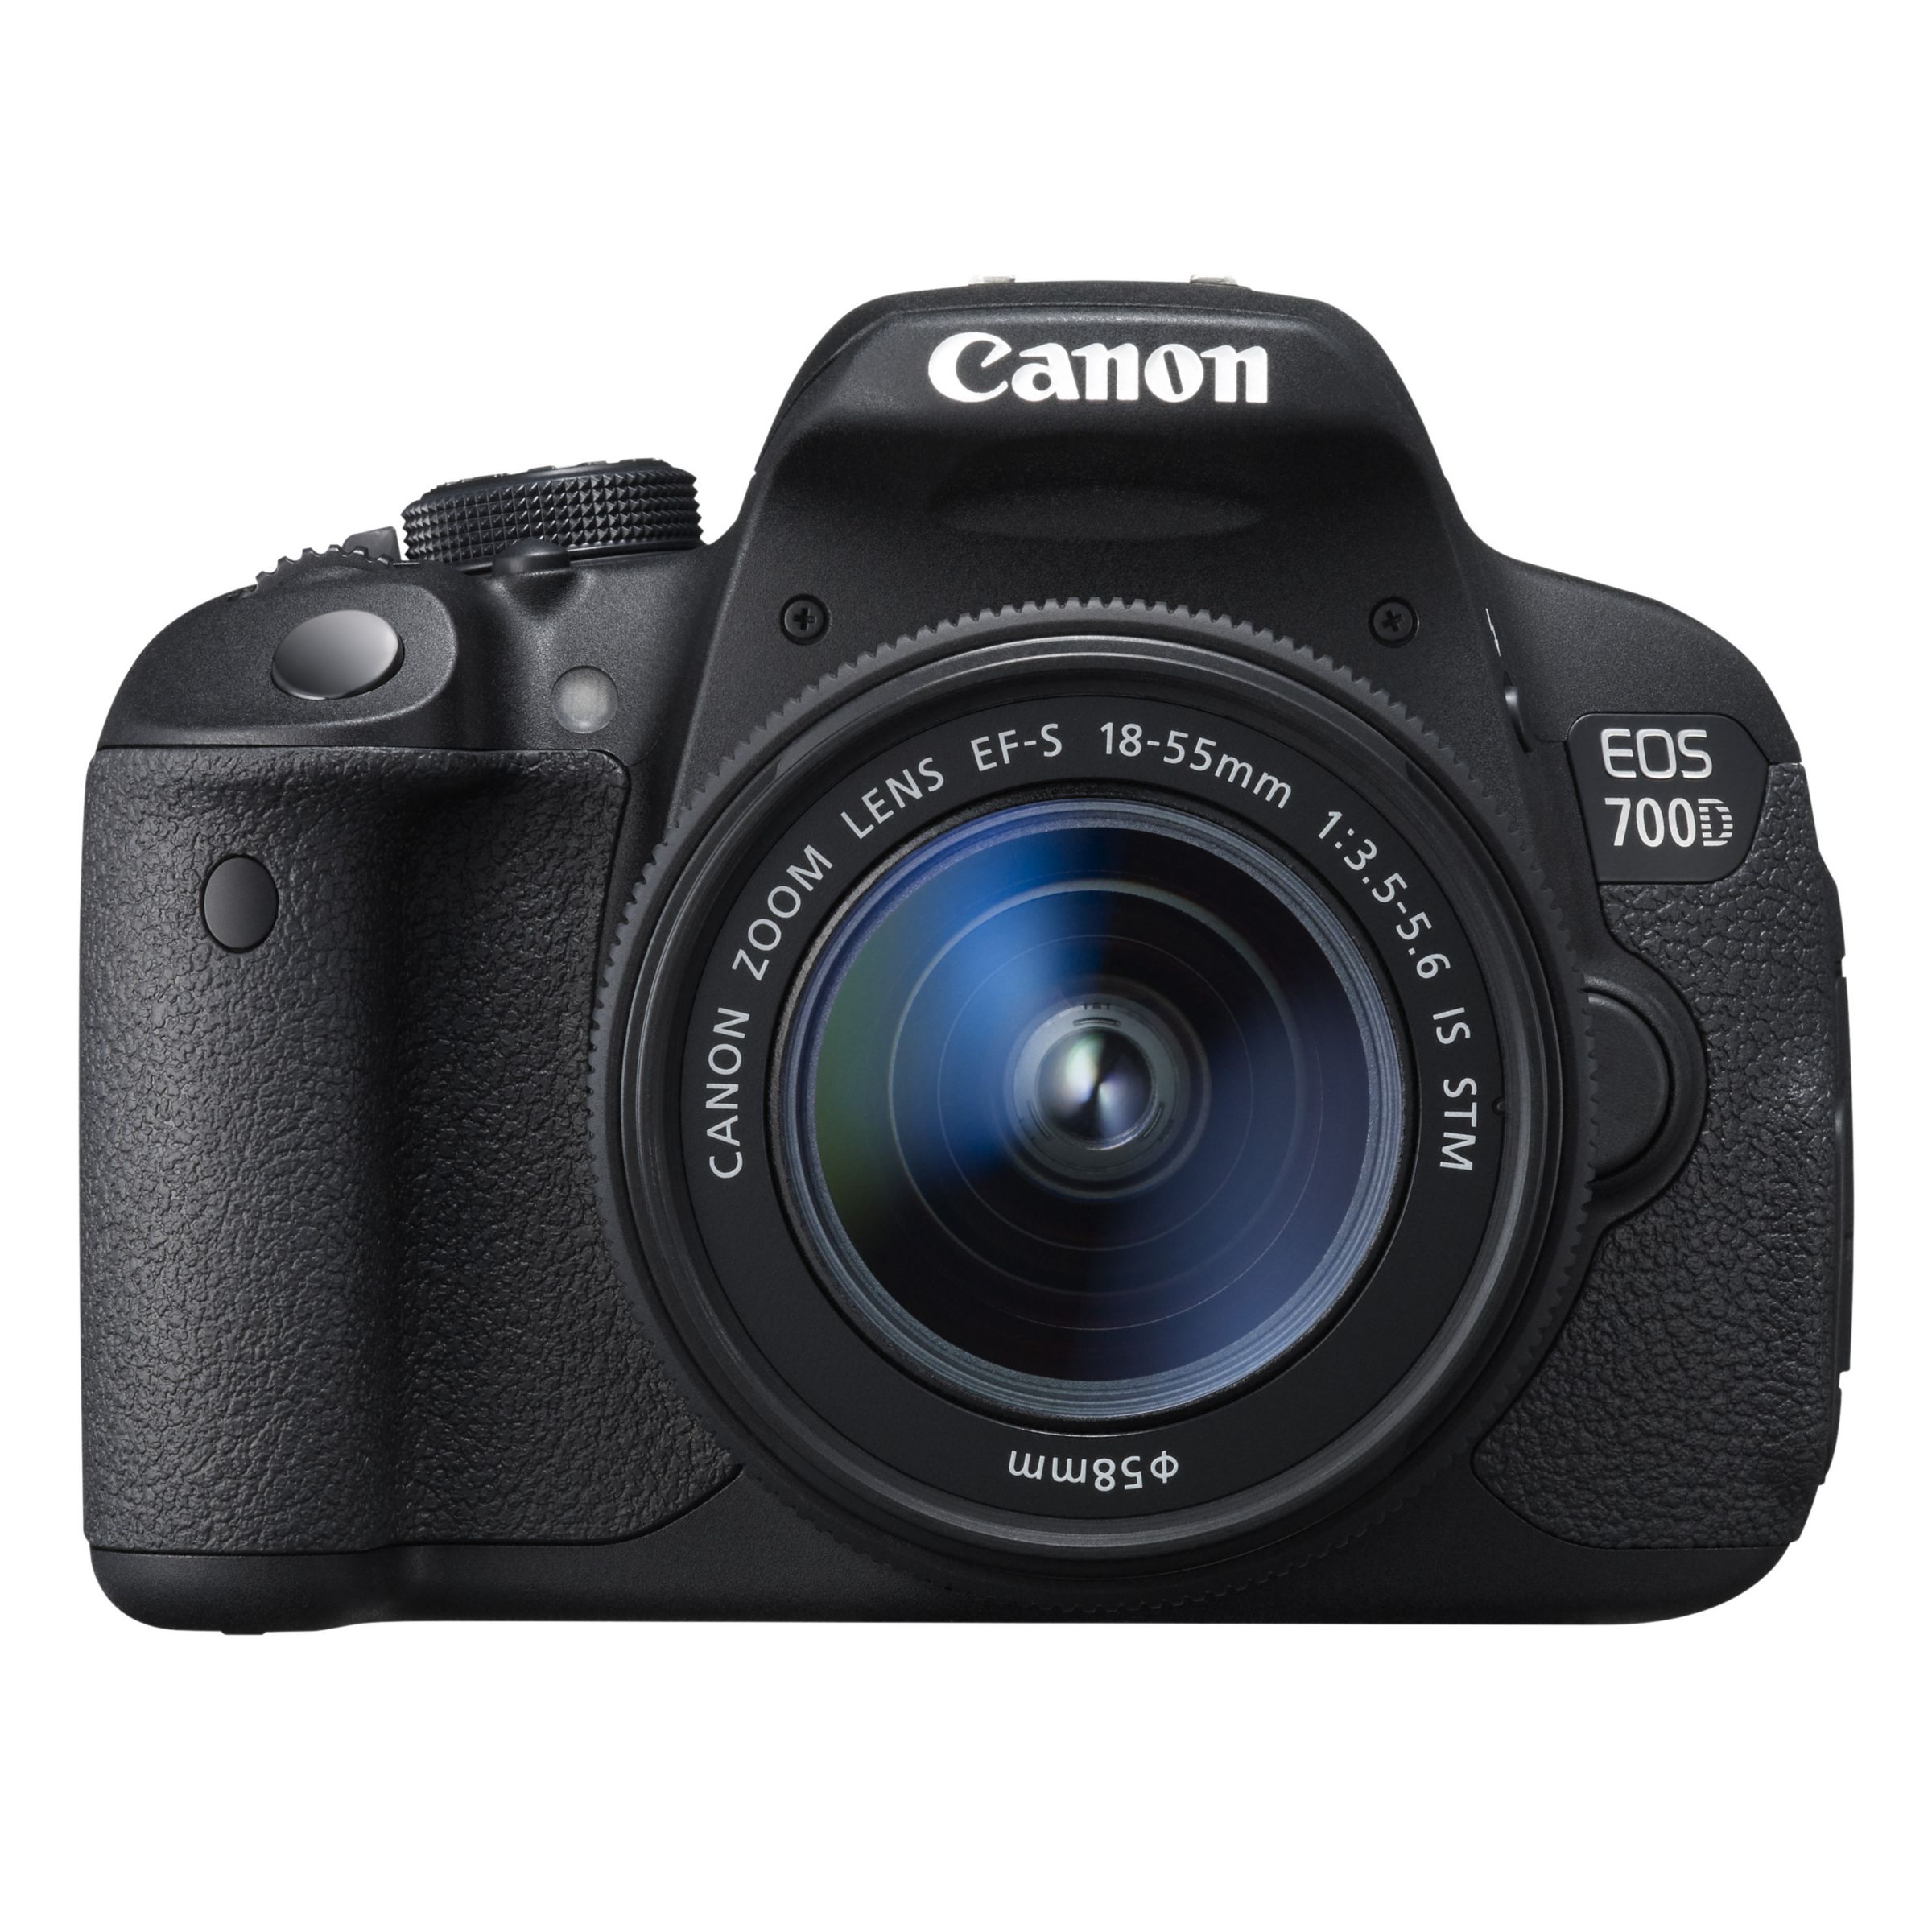 Buy Canon EOS 700D Digital SLR Camera with 18-55mm STM Lens, HD 1080p, 18MP, 3" LCD Touch Screen Online at johnlewis.com